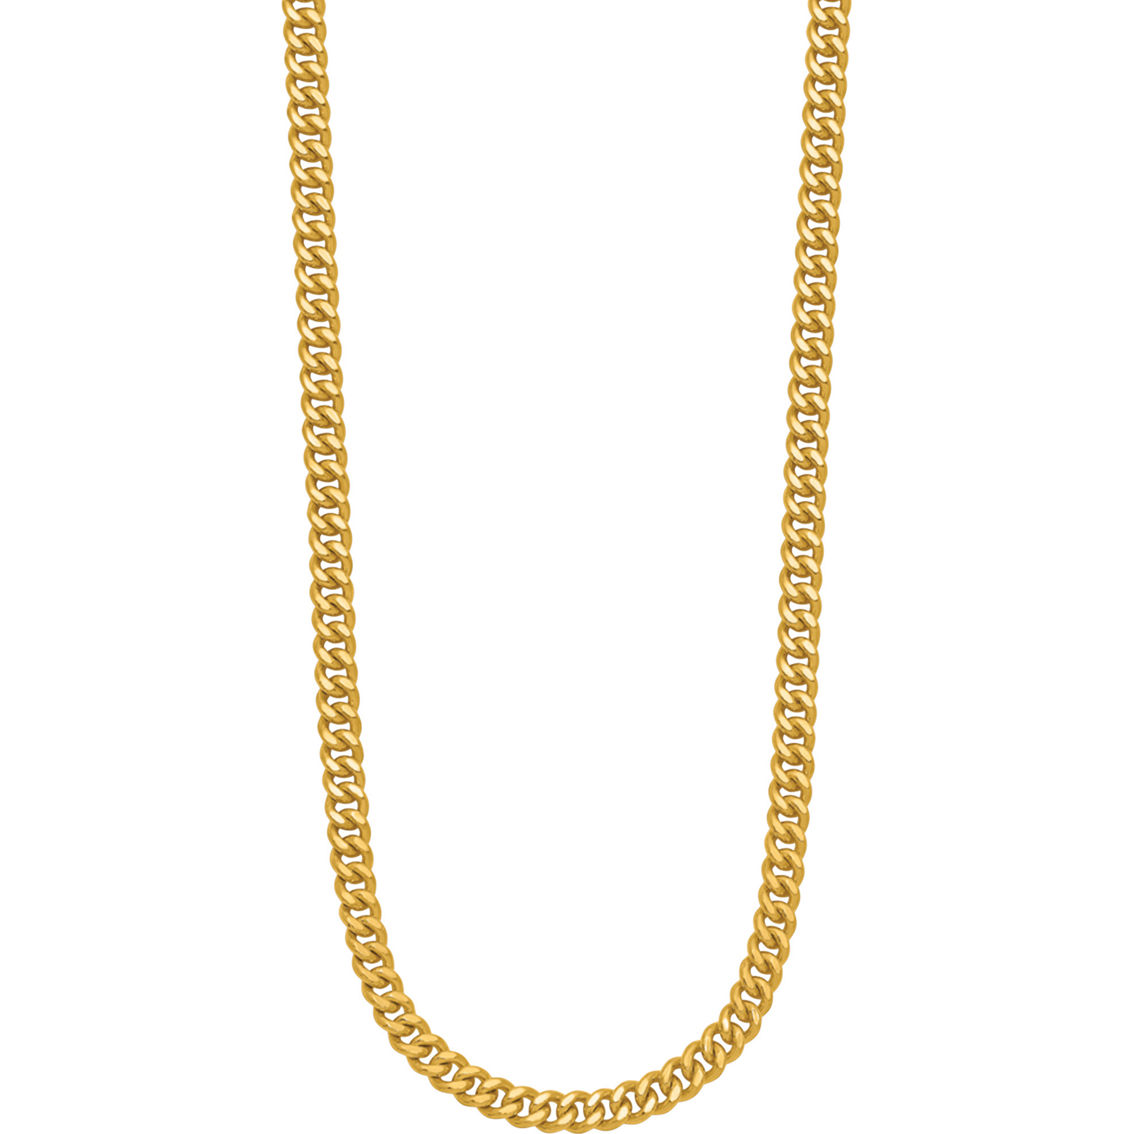 24K Pure Gold 24K Yellow Gold 5mm Solid Curb 20 in. Chain - Image 2 of 5